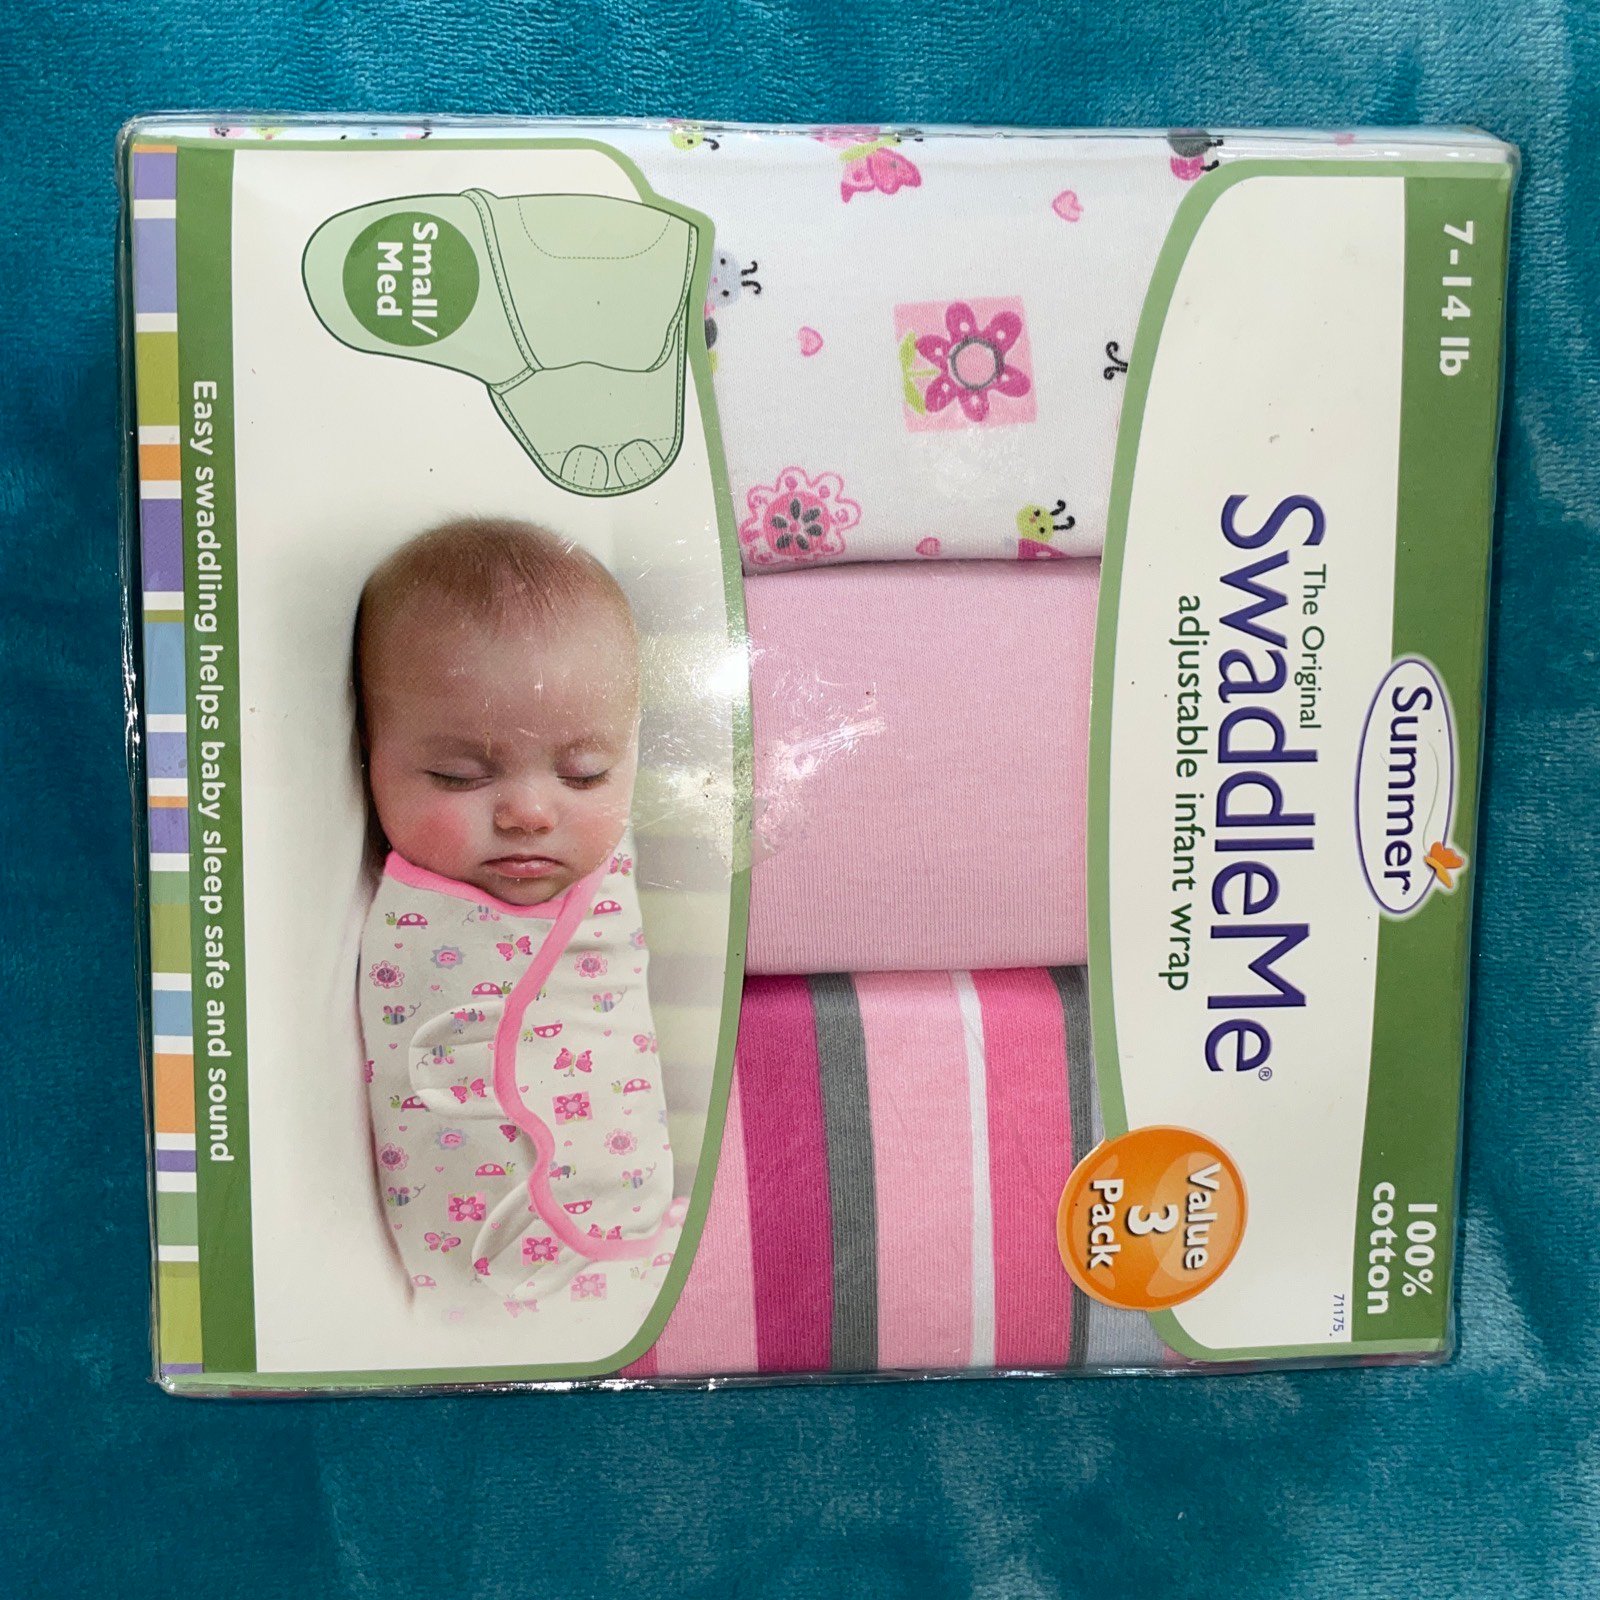 Summer Swaddle Me adjustable infant/baby wrap 7-14 lbs 